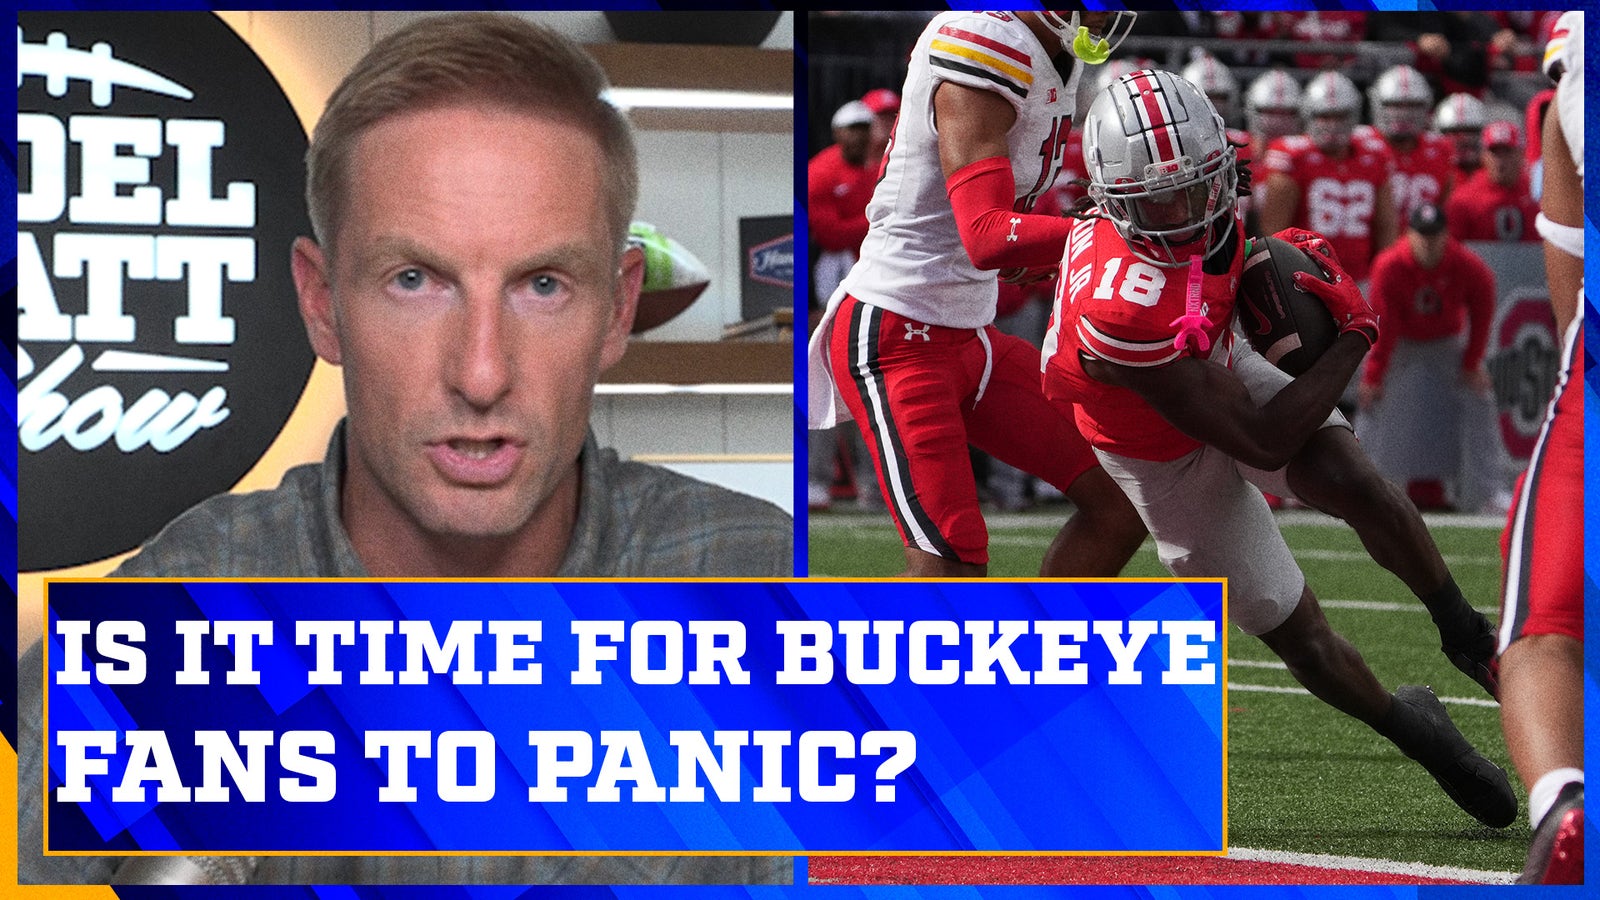 Should Ohio State be concerned?